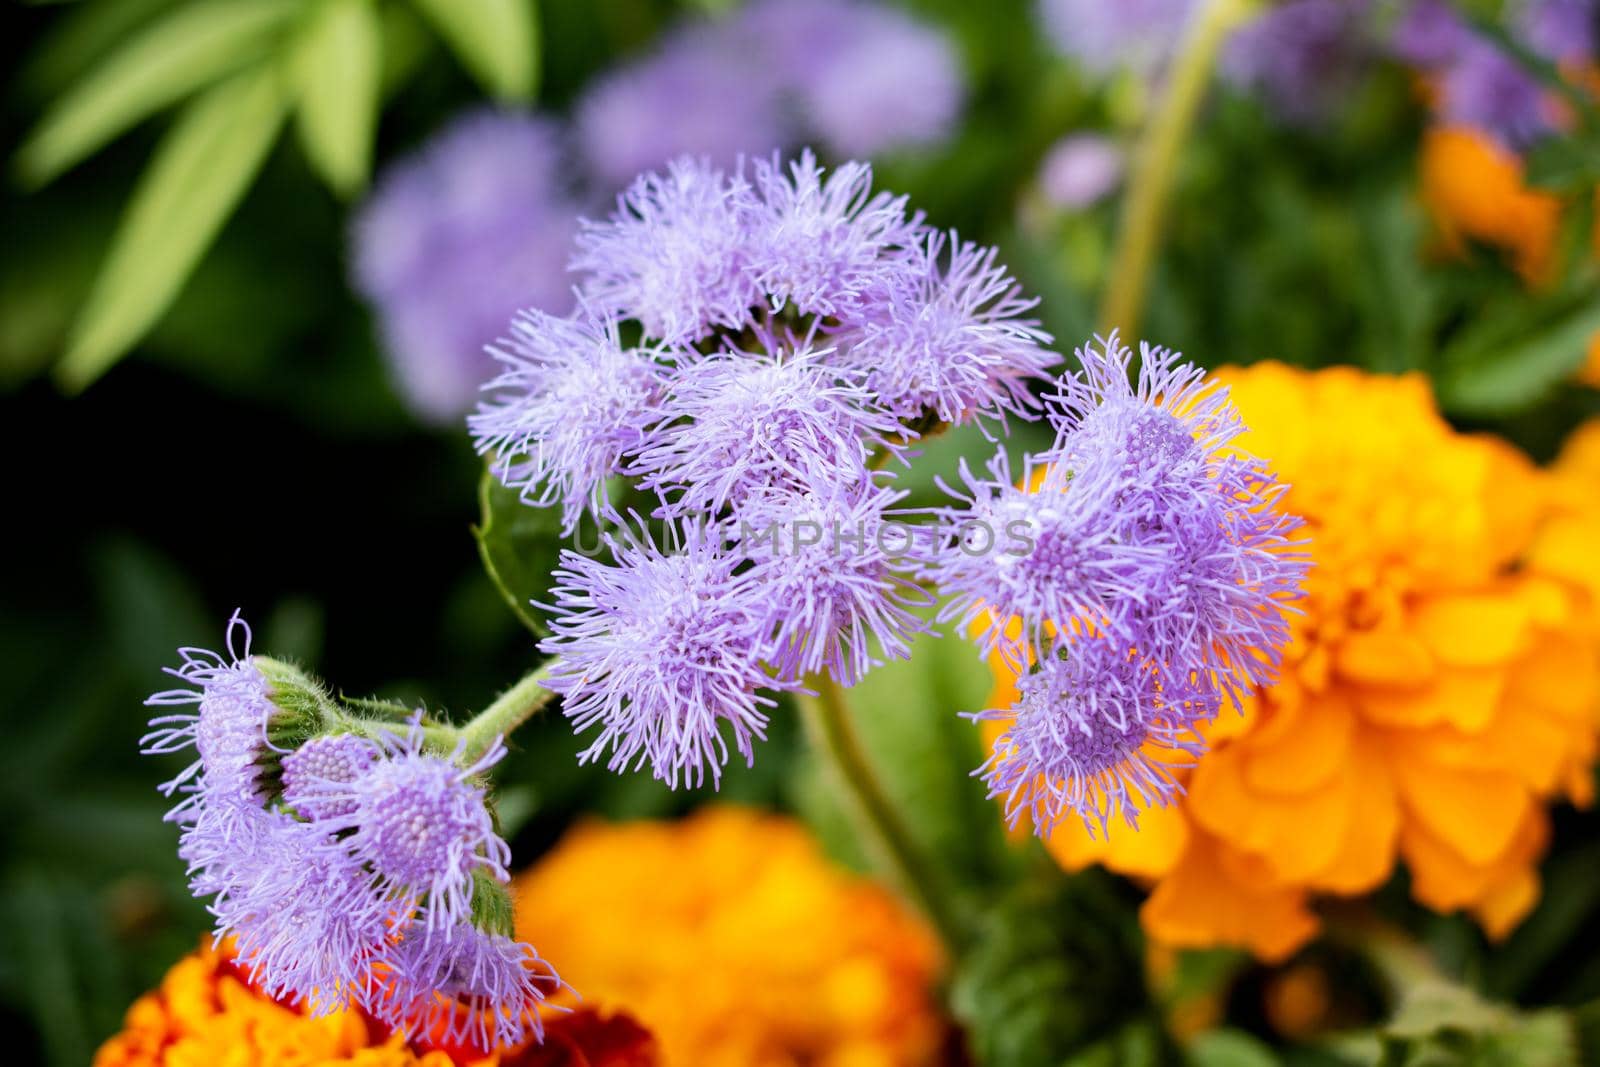 Purple ageratum flowers among green leaves closeup by Vera1703